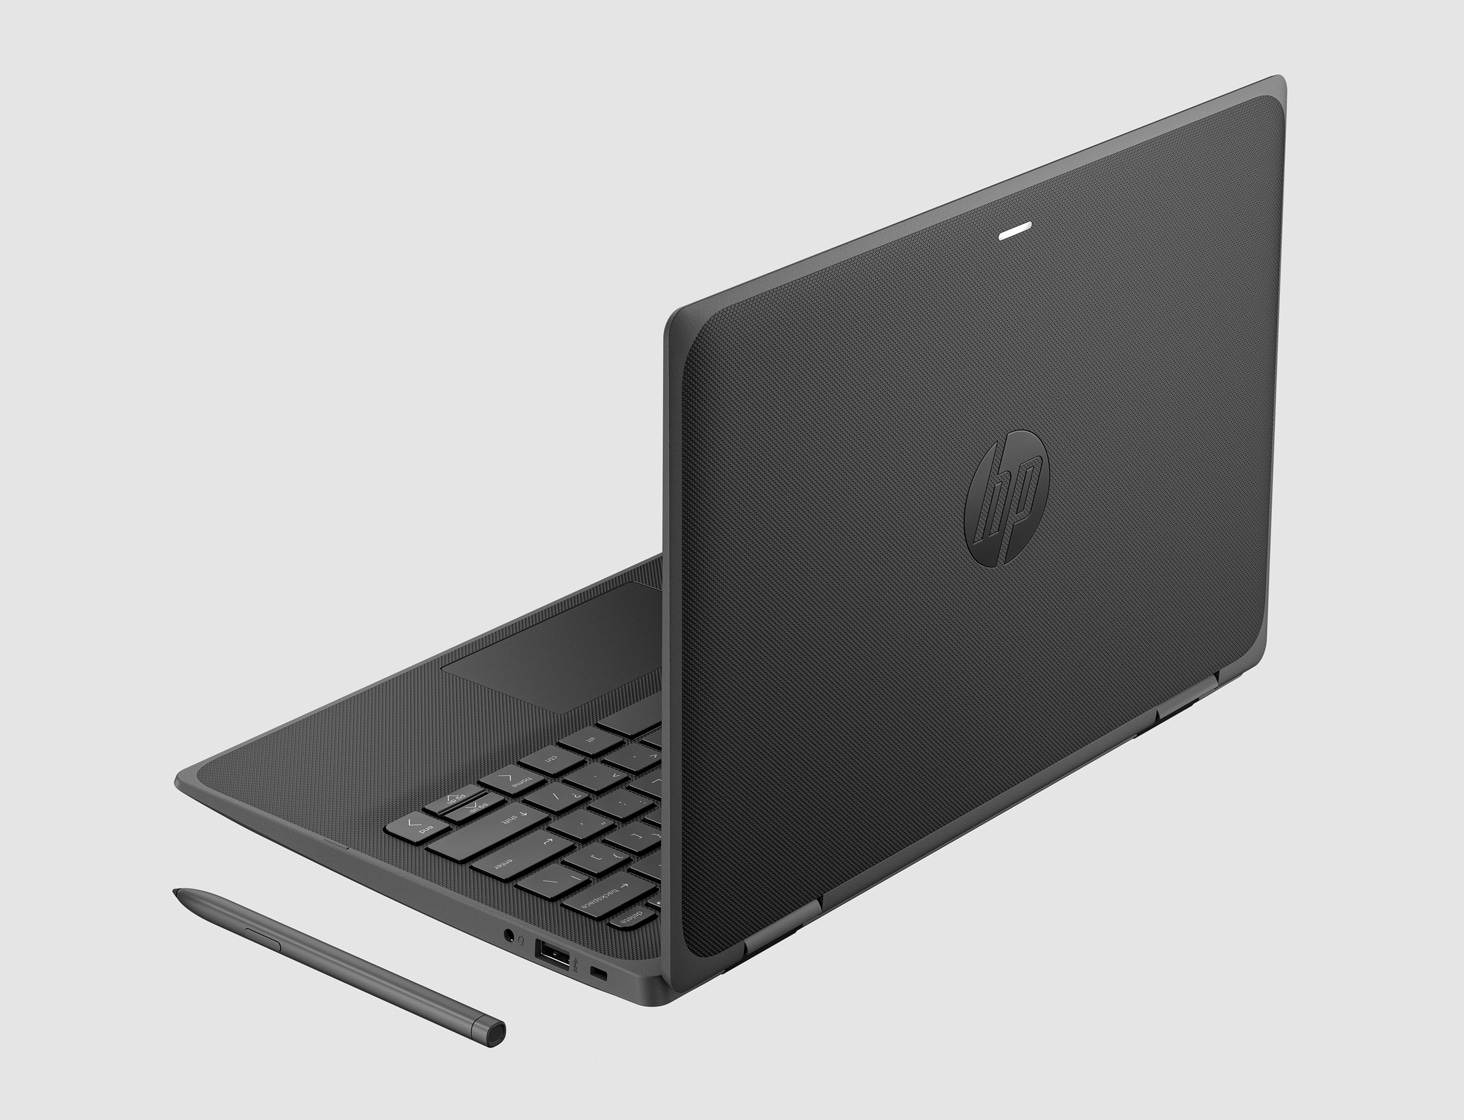 In Stock HP ProBook 450 Laptop| HP® Official Store